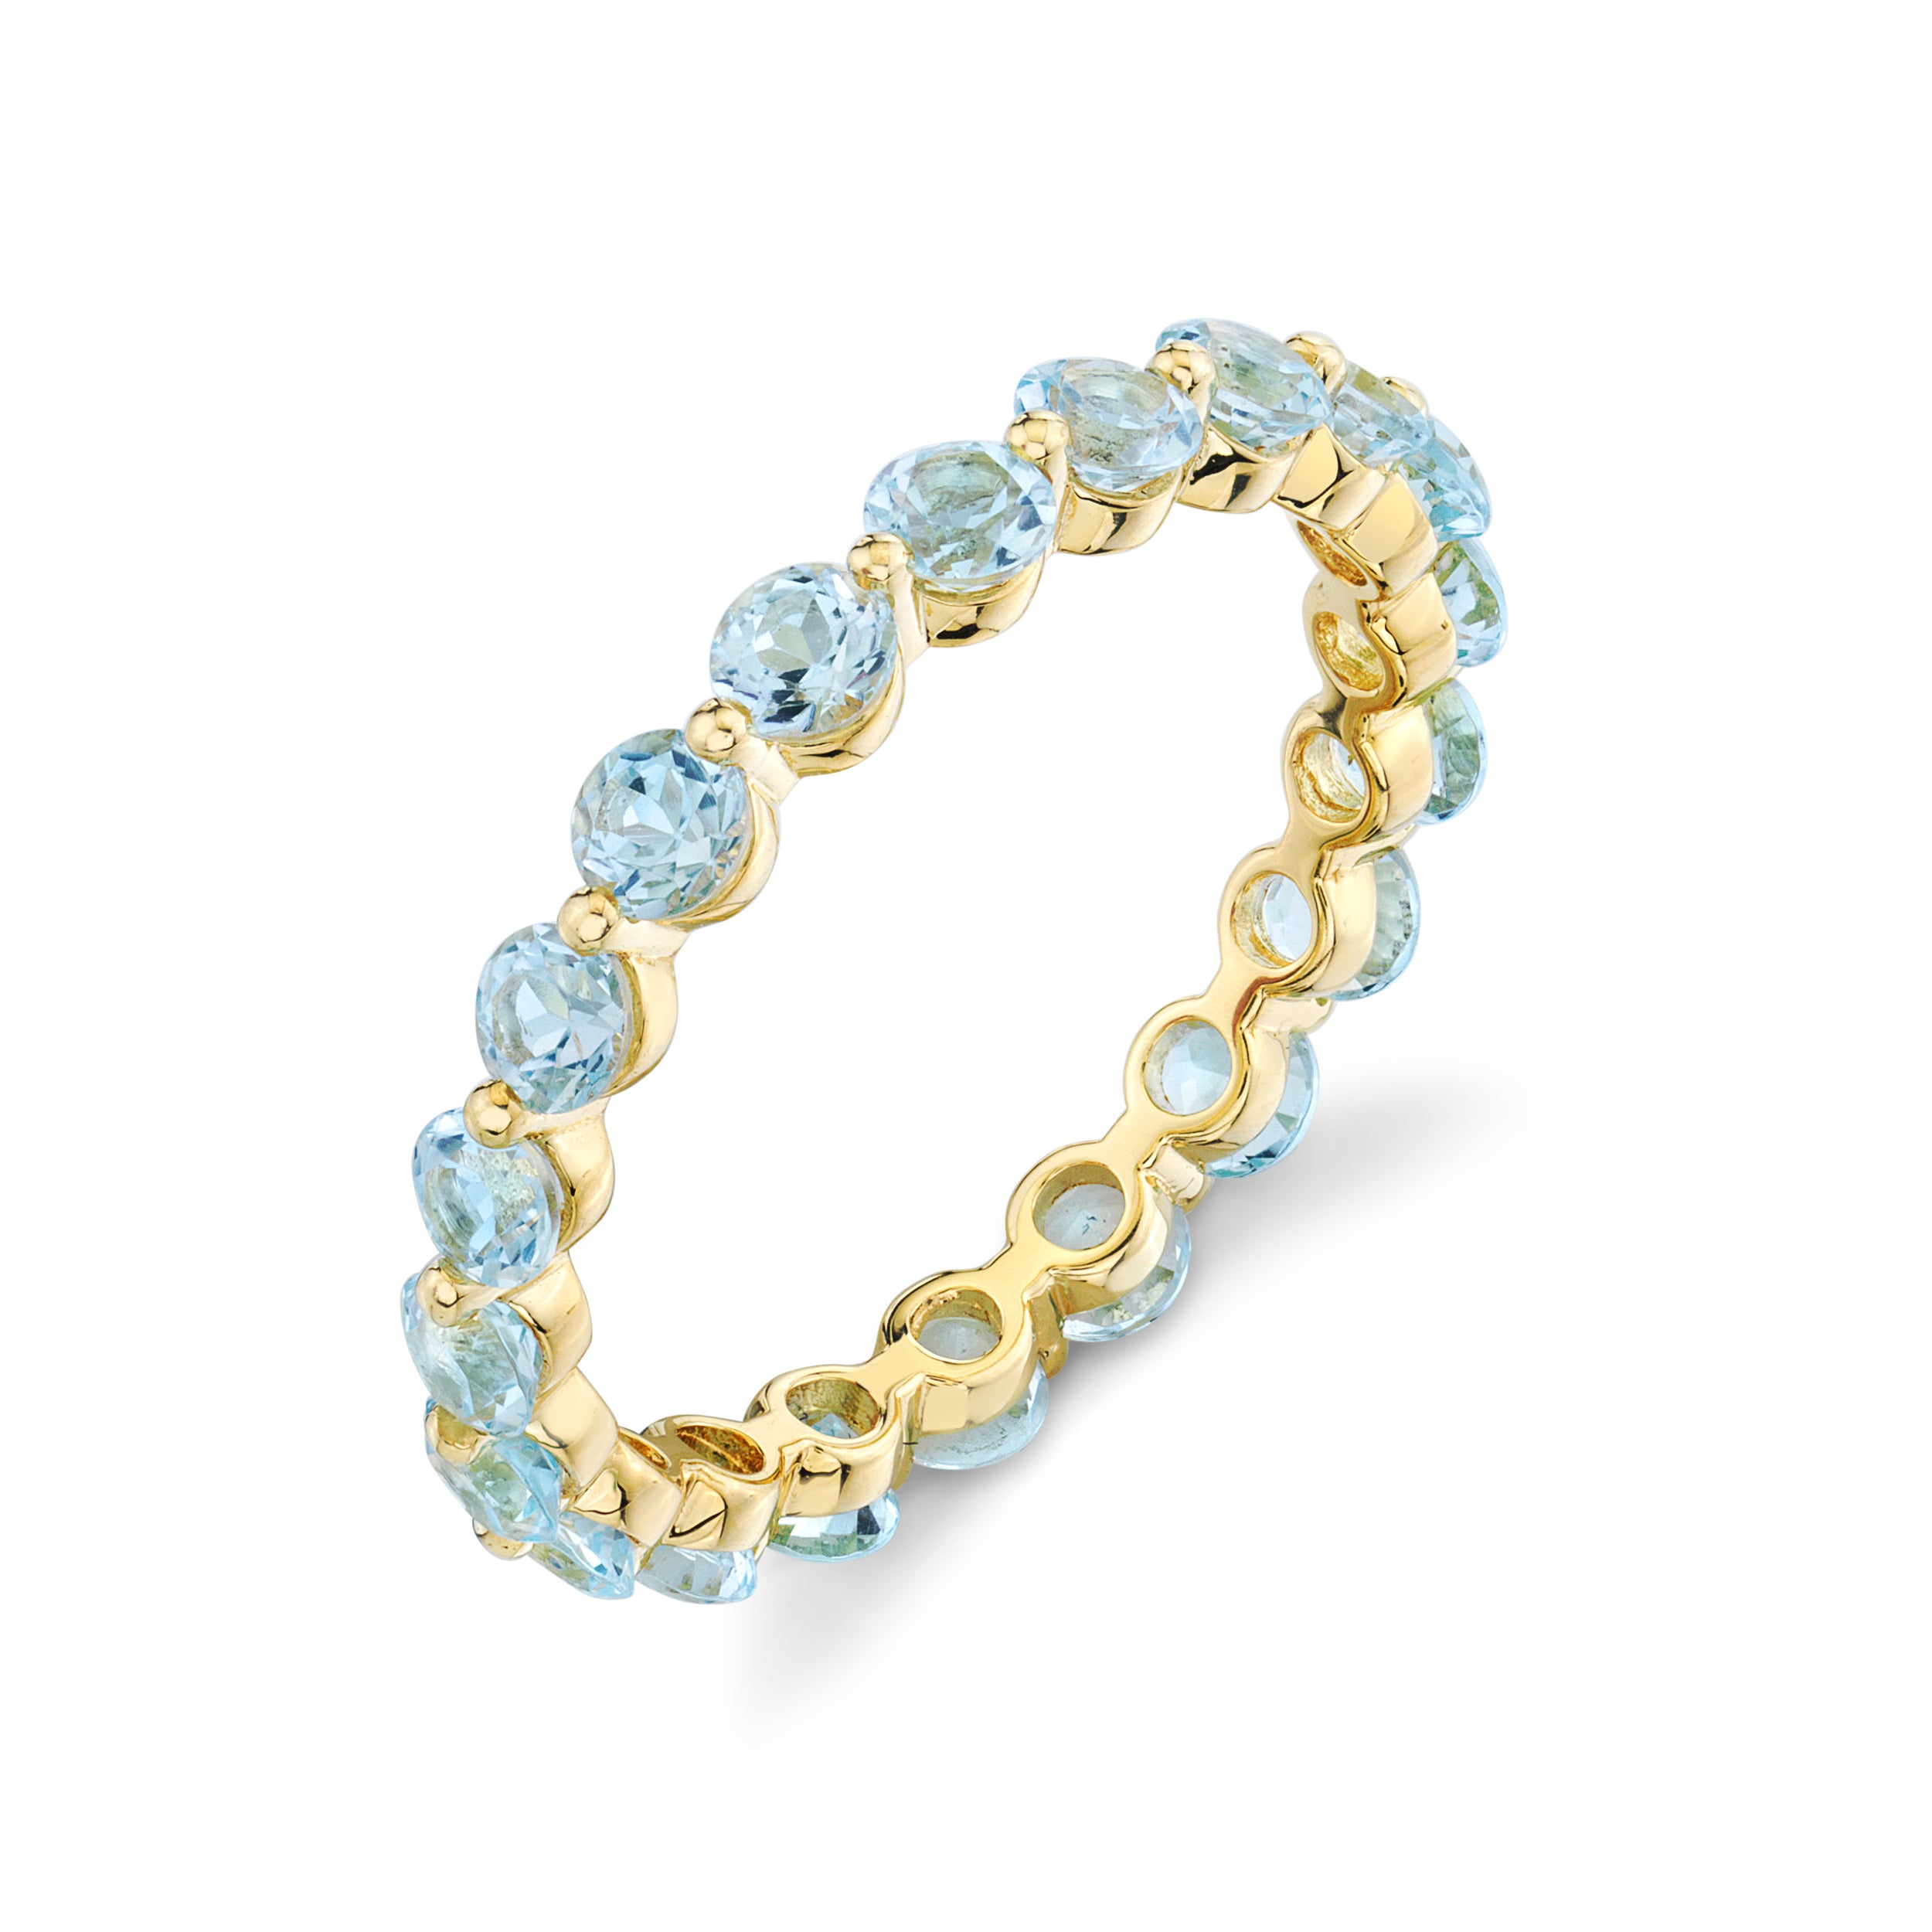 Sky Blue Topaz Eternity Band with Prong Spacers